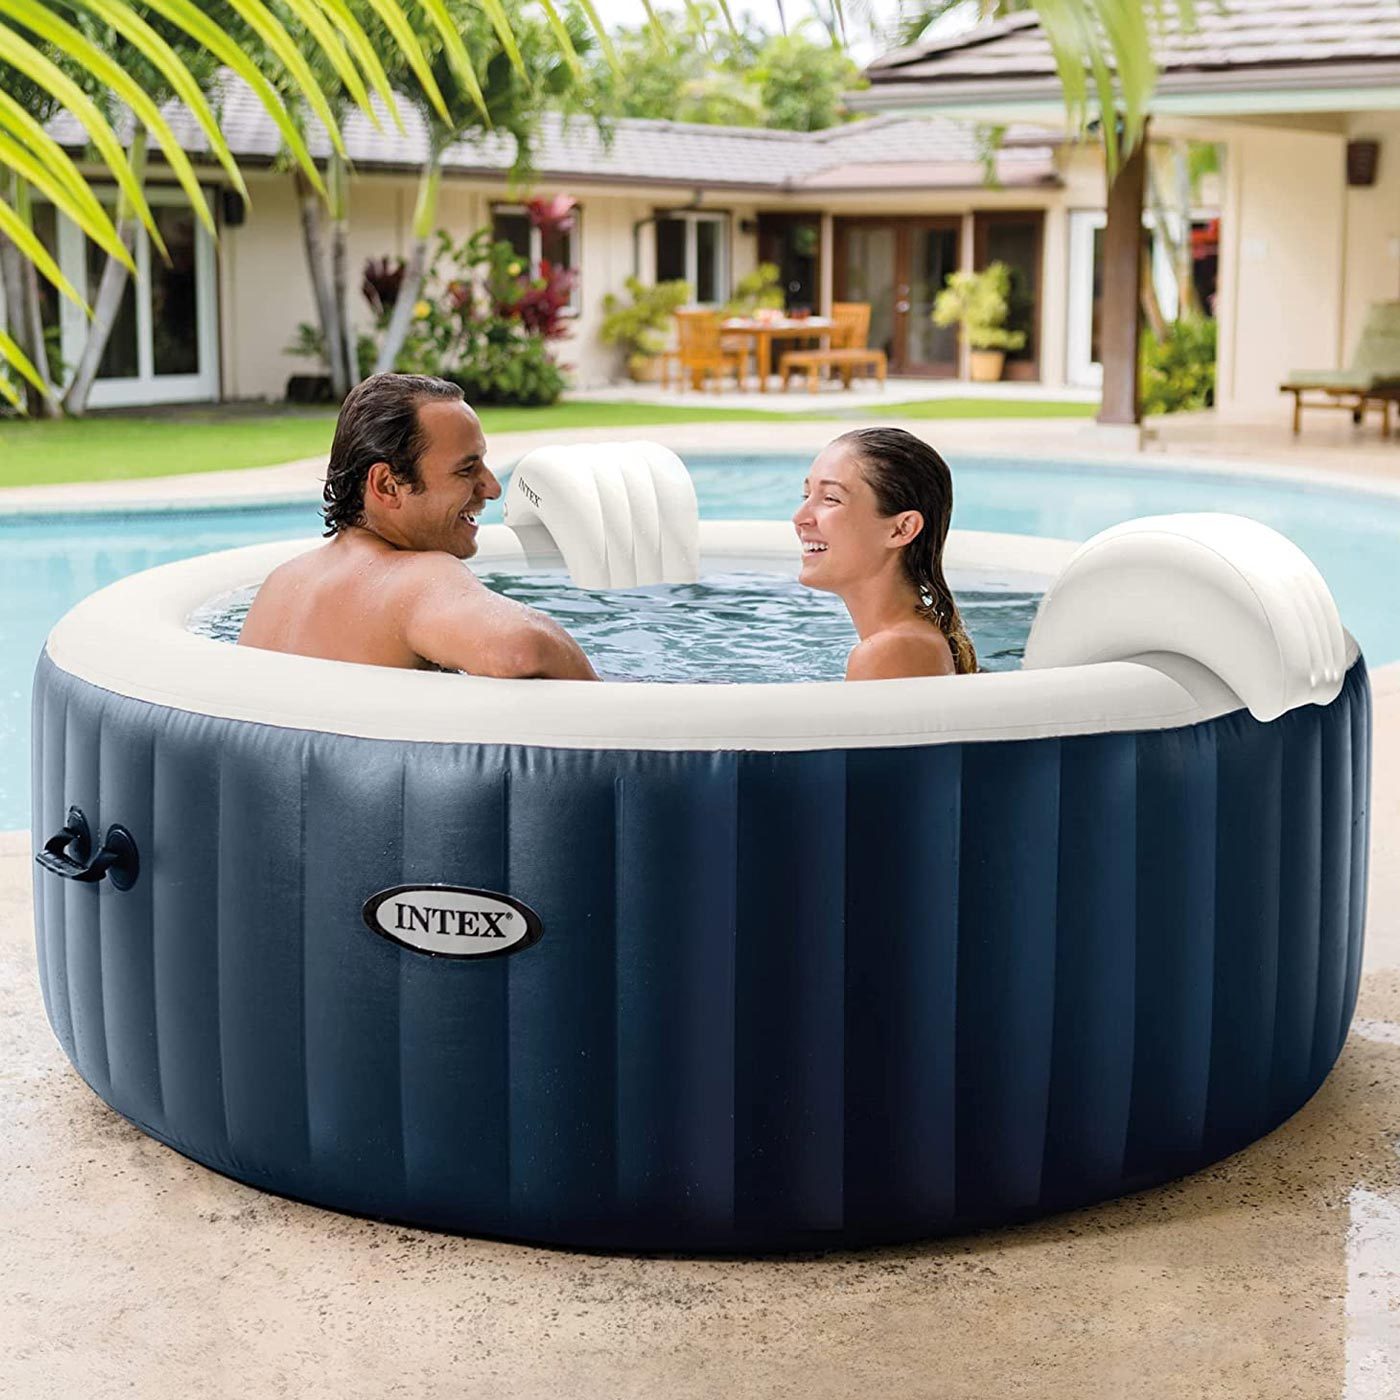 6 Best Inflatable Hot Tub Picks for Ultimate Relaxation